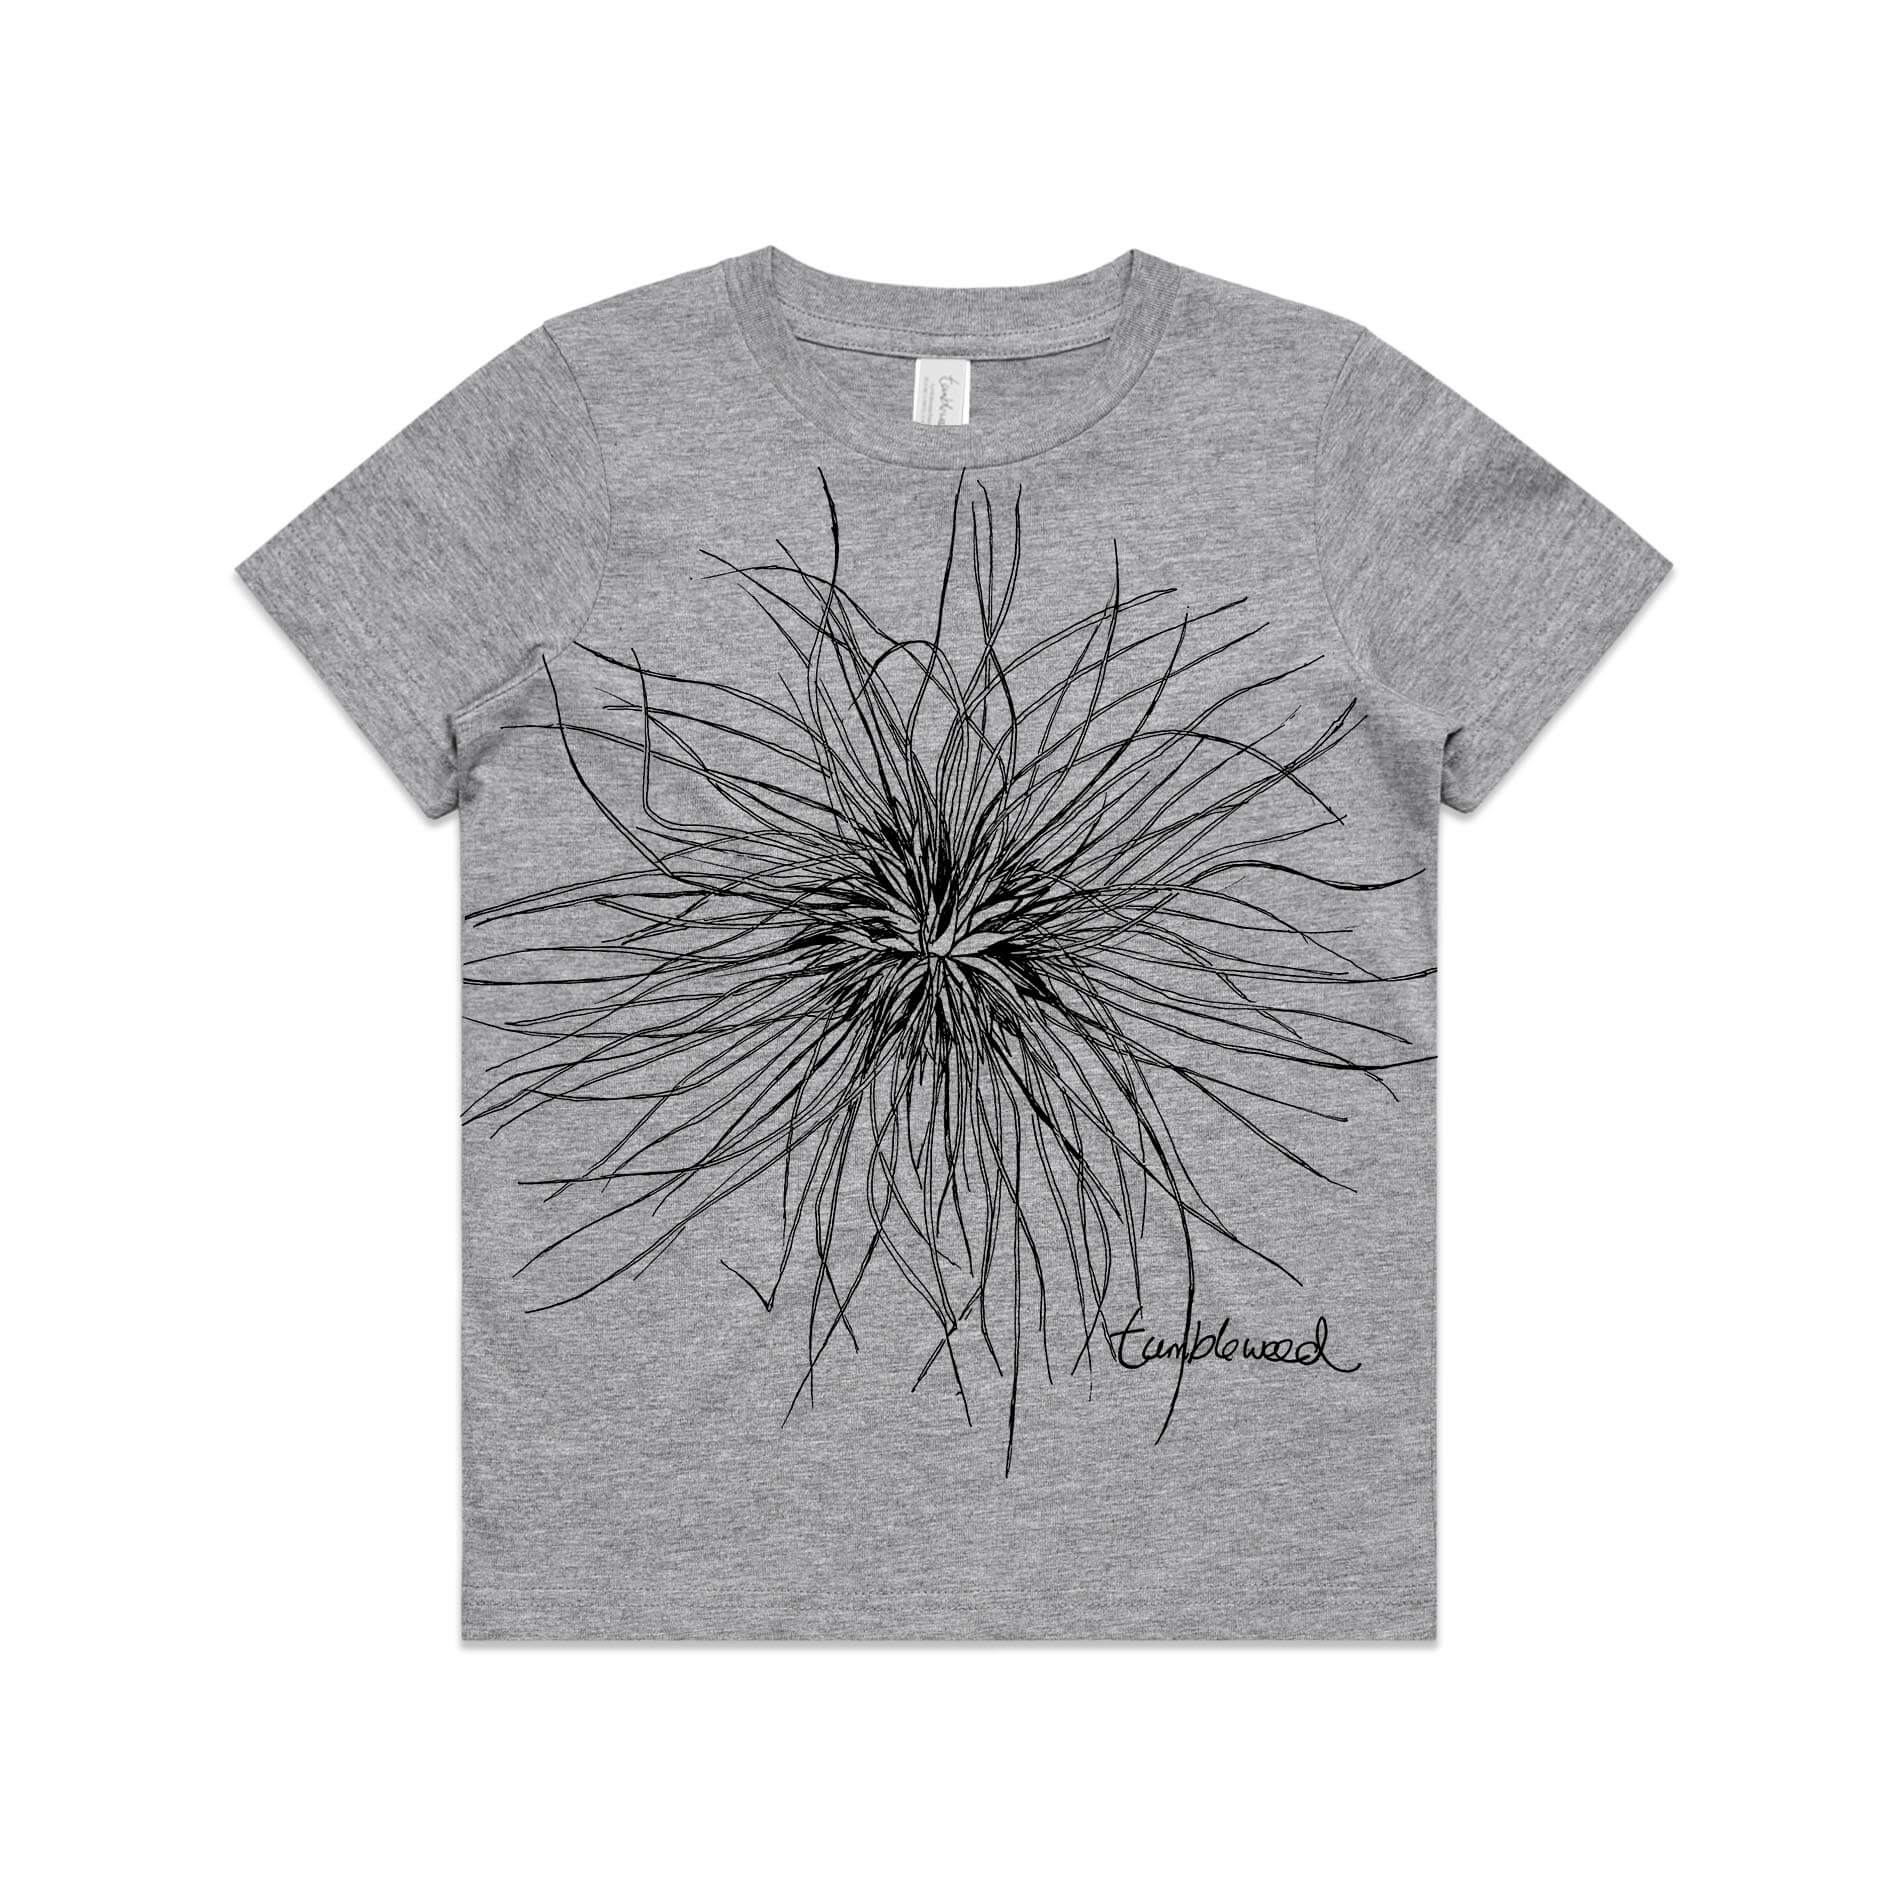 Grey marle, cotton kids' t-shirt with screen printed Kids tumbleweed/spinifex design.